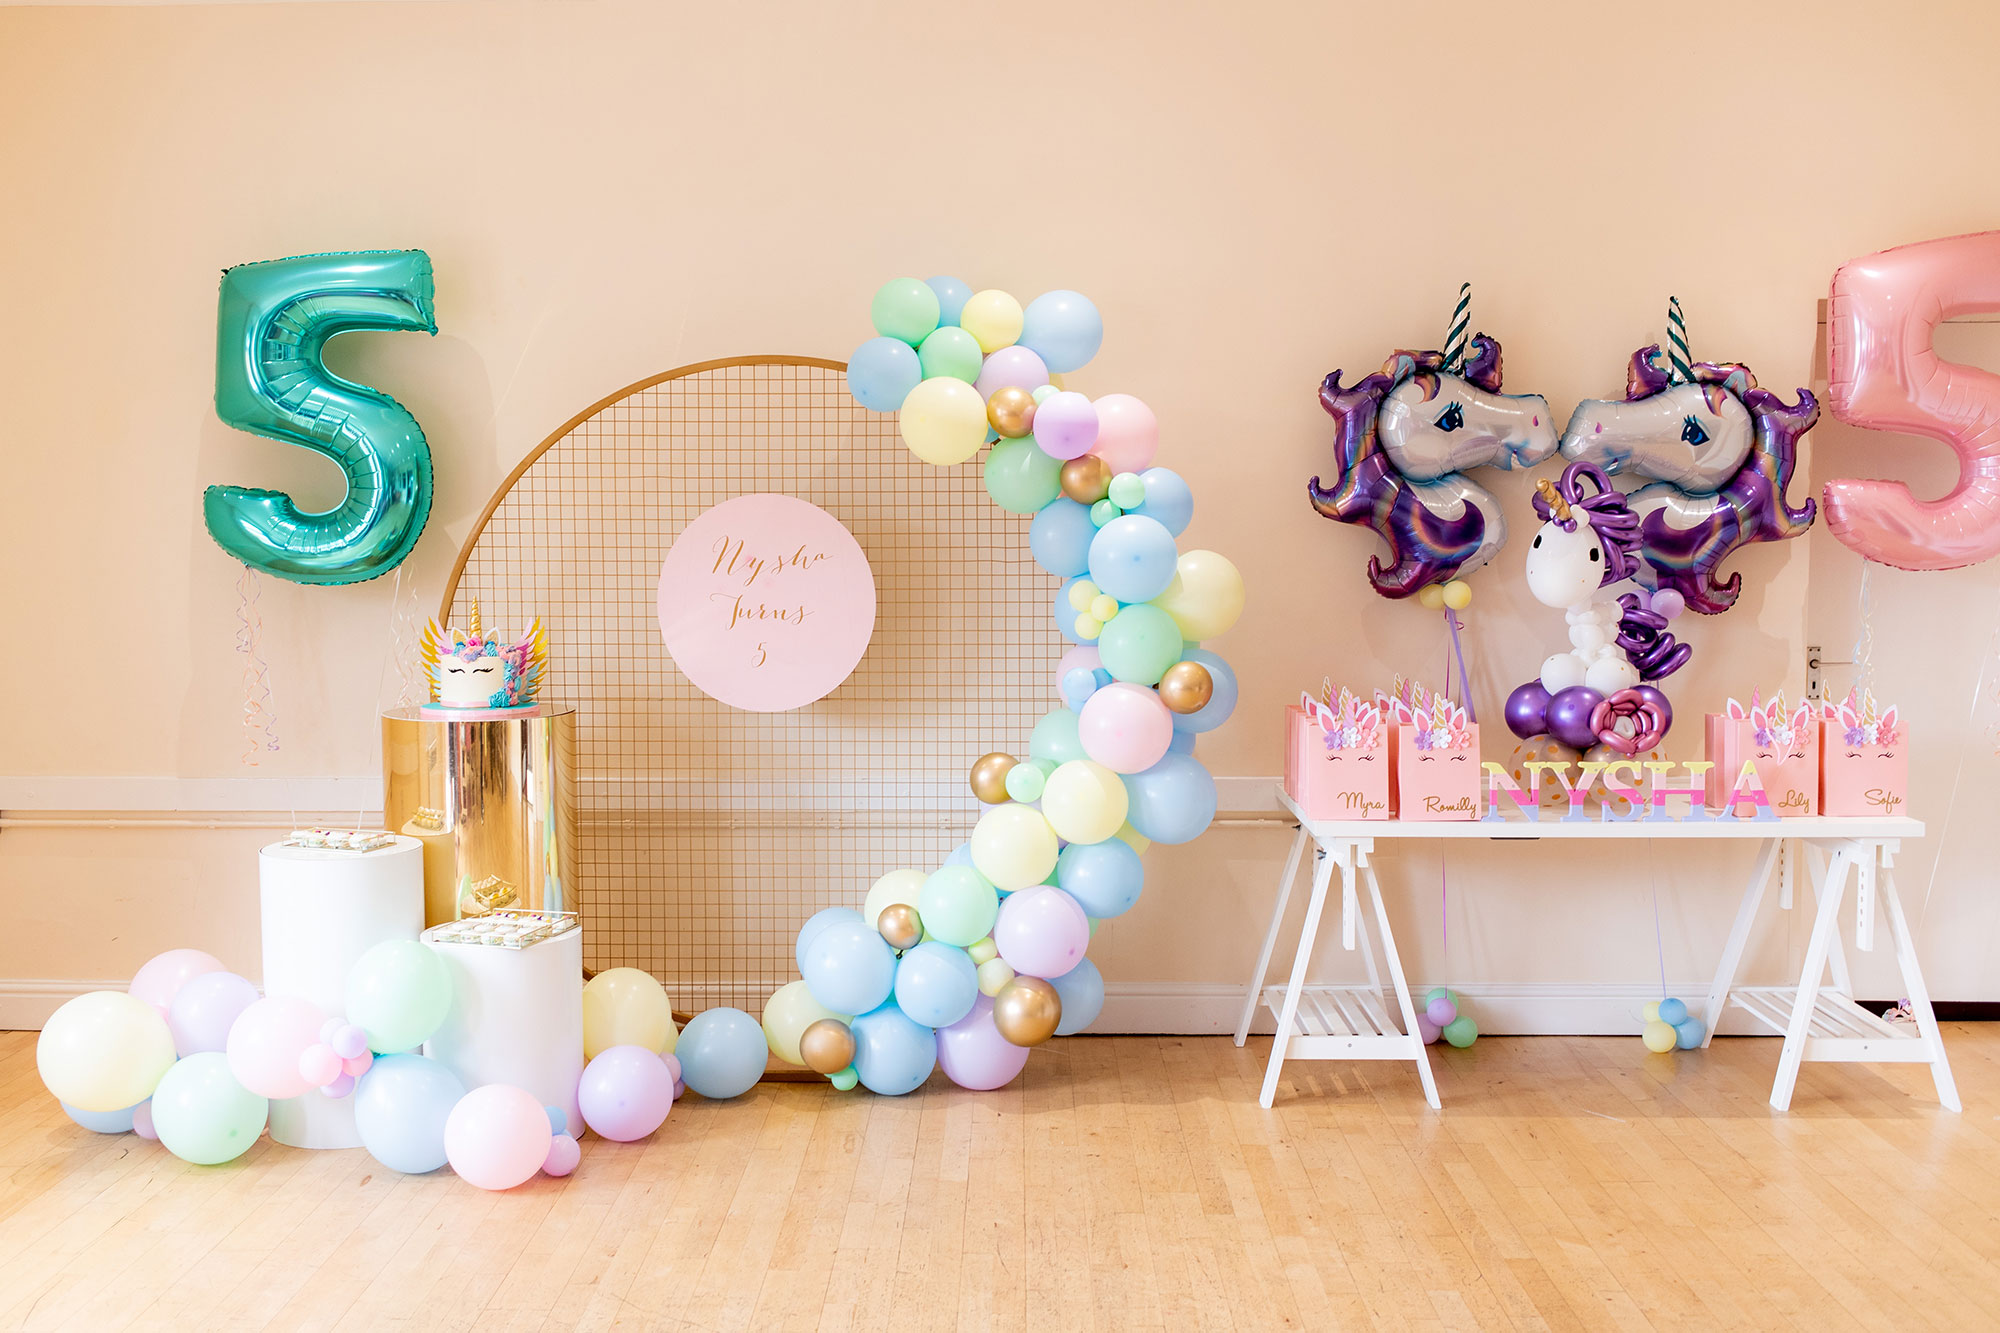 Back to school parties - Unicorn themed 5th Birthday party decor